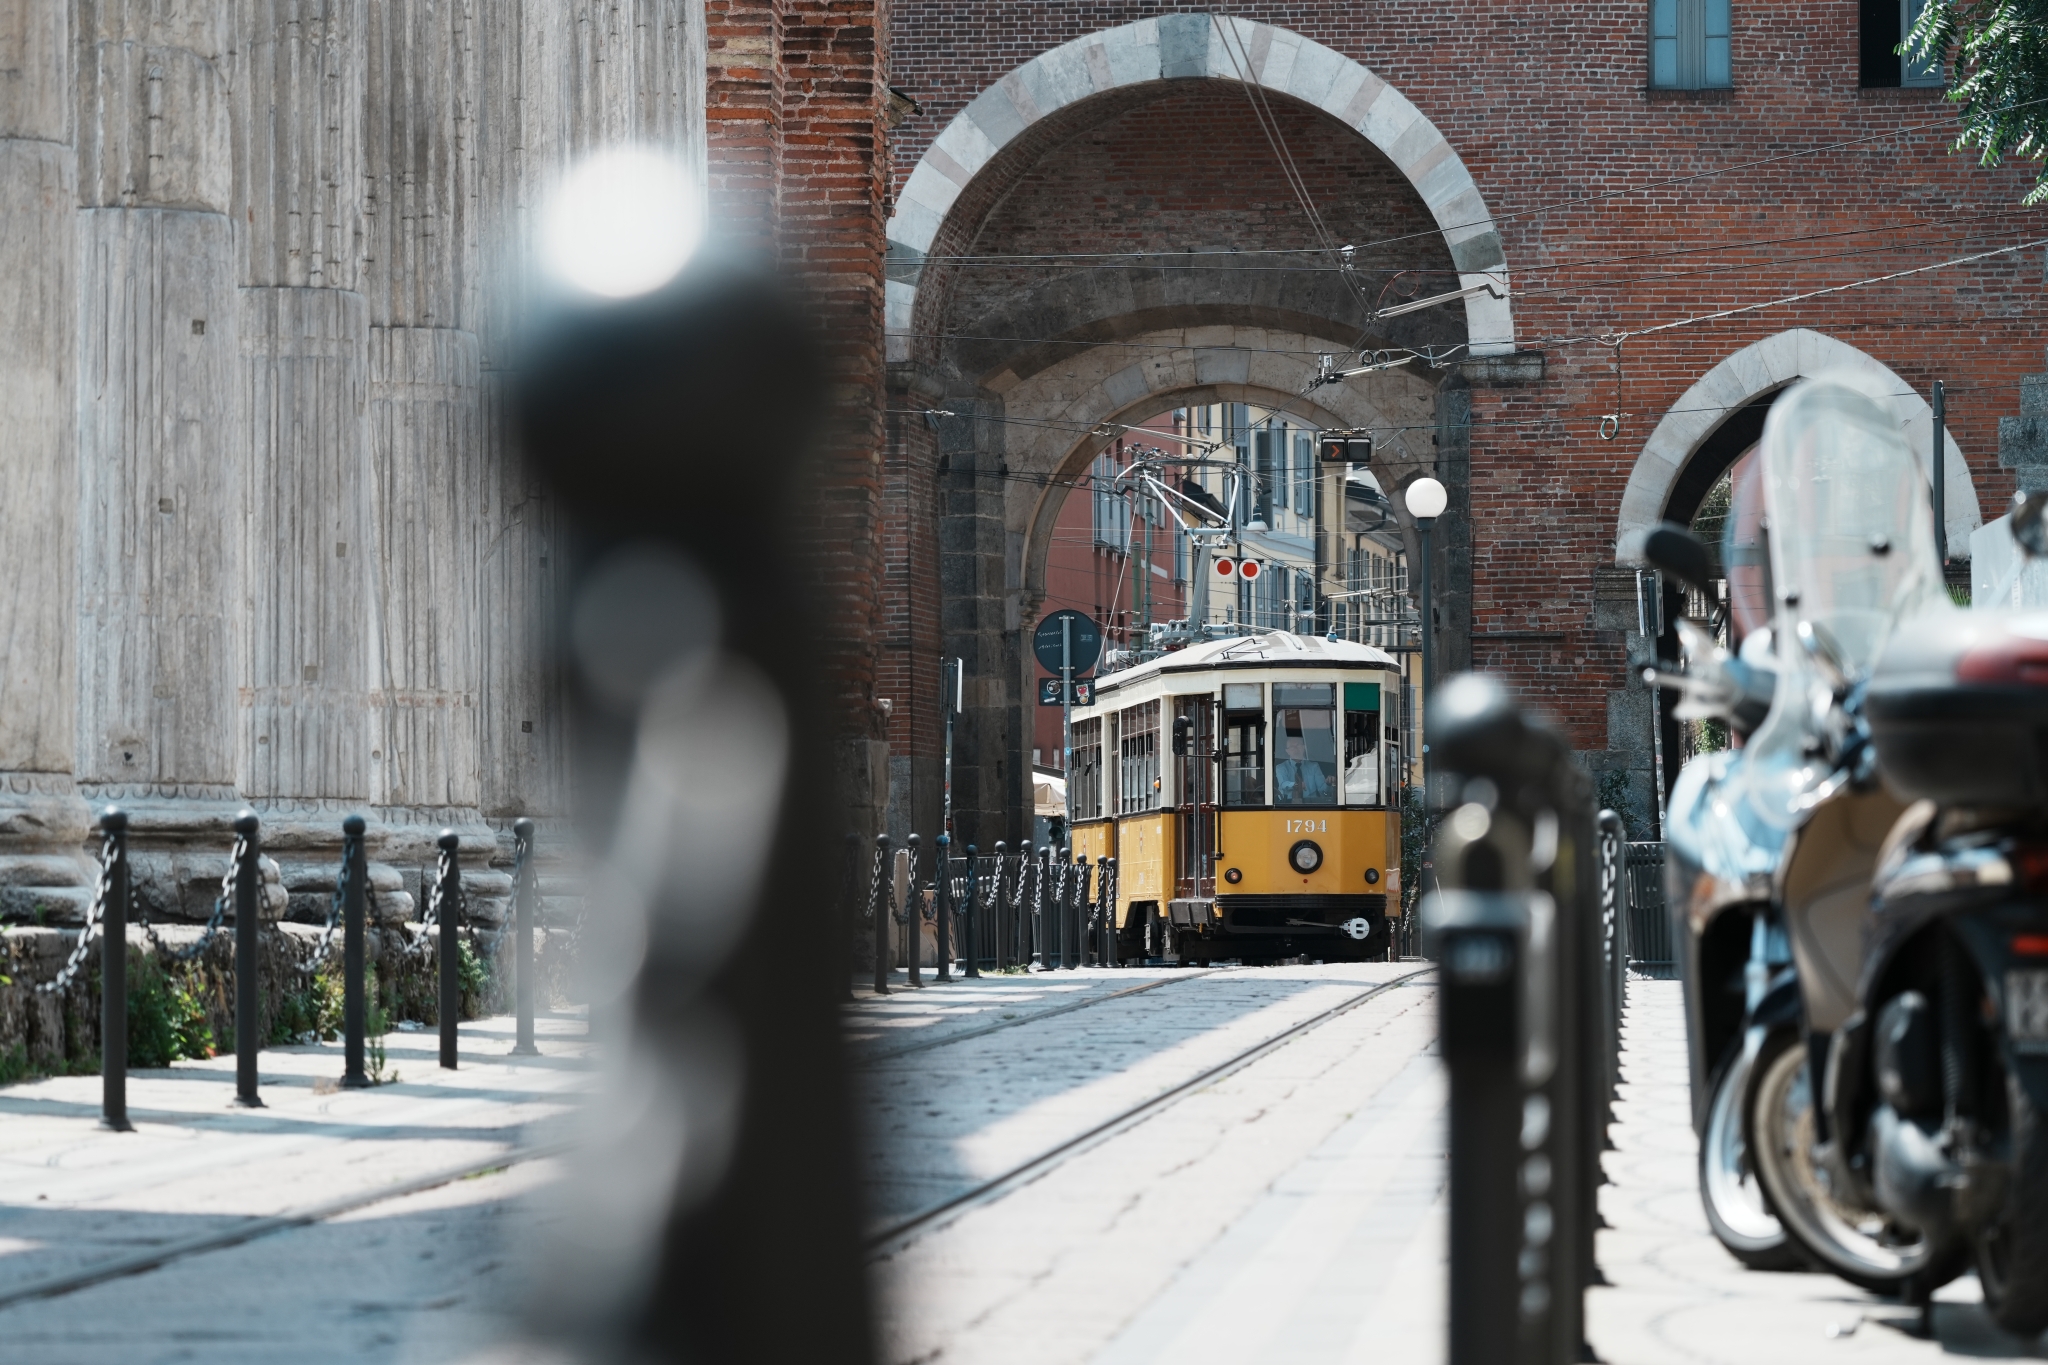 Tram travelling through an archway with a bollard in bokeh foreground